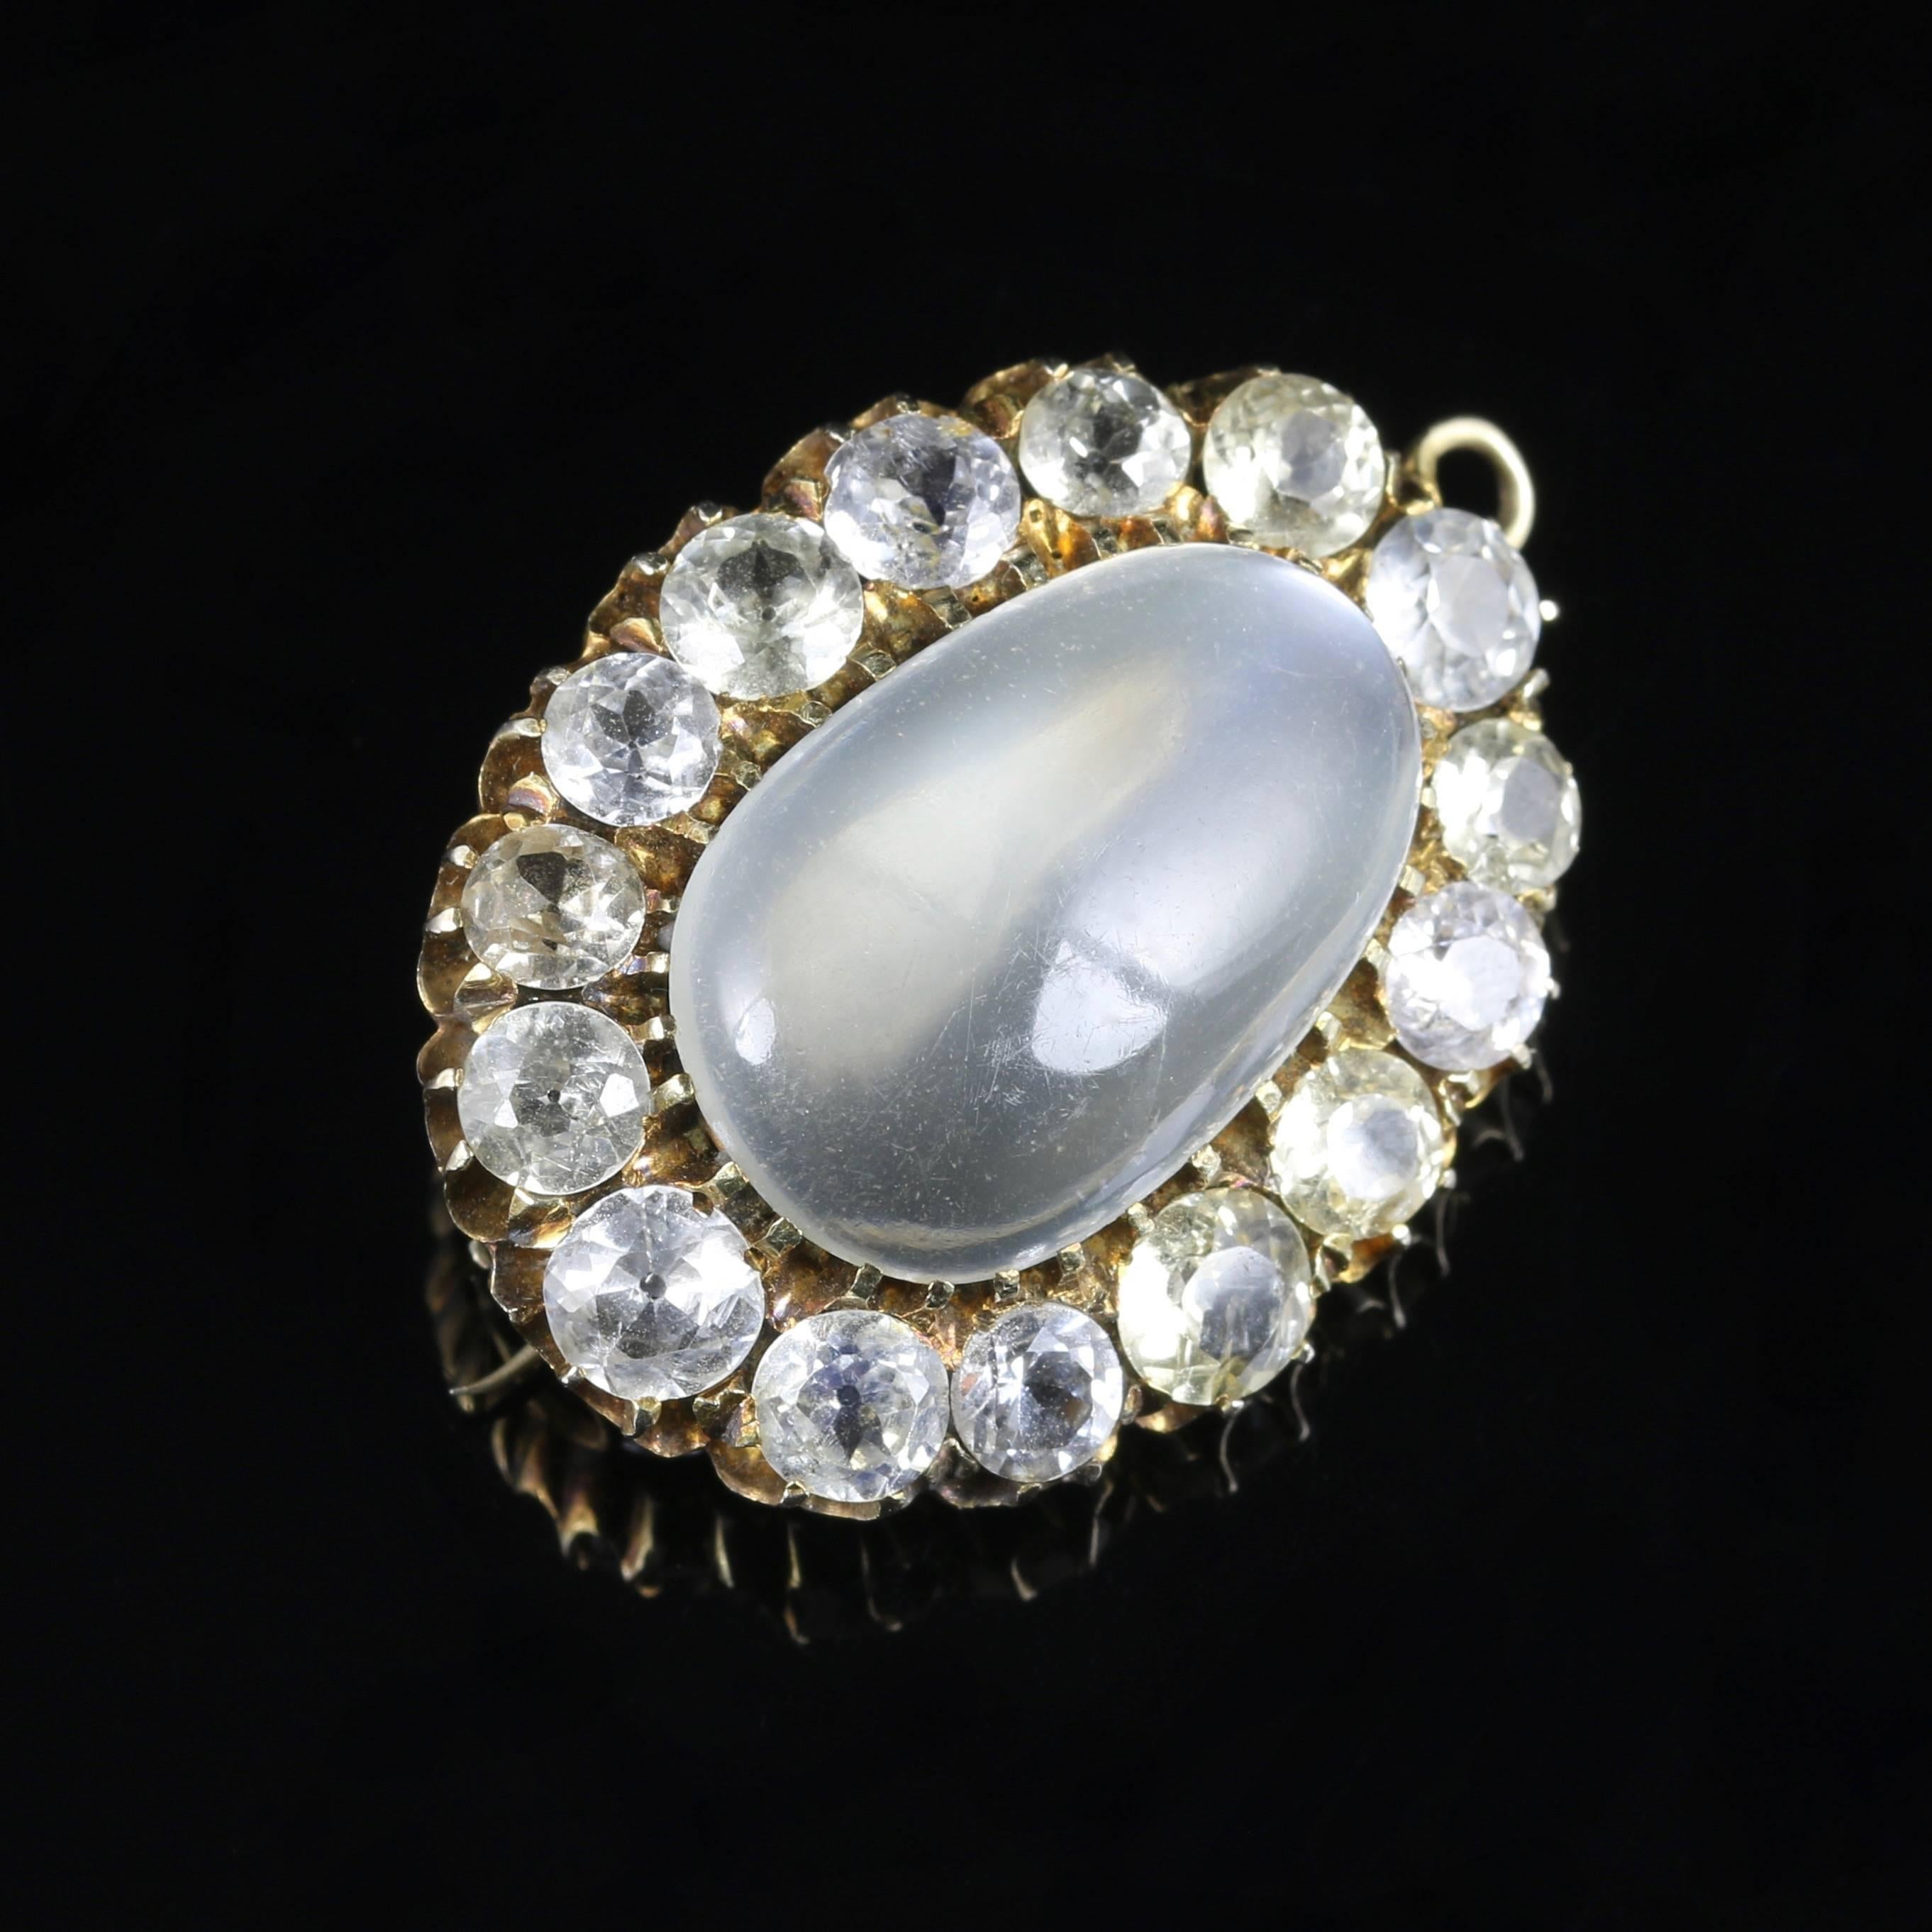 This fabulous 15ct Yellow Gold Victorian brooch is Circa 1900, set with a 20ct natural Moonstone in the centre surrounded by old cut Paste stones.

The beautiful Moonstone has a lovely ghostly hue, moonstone has been a tangible connection to the